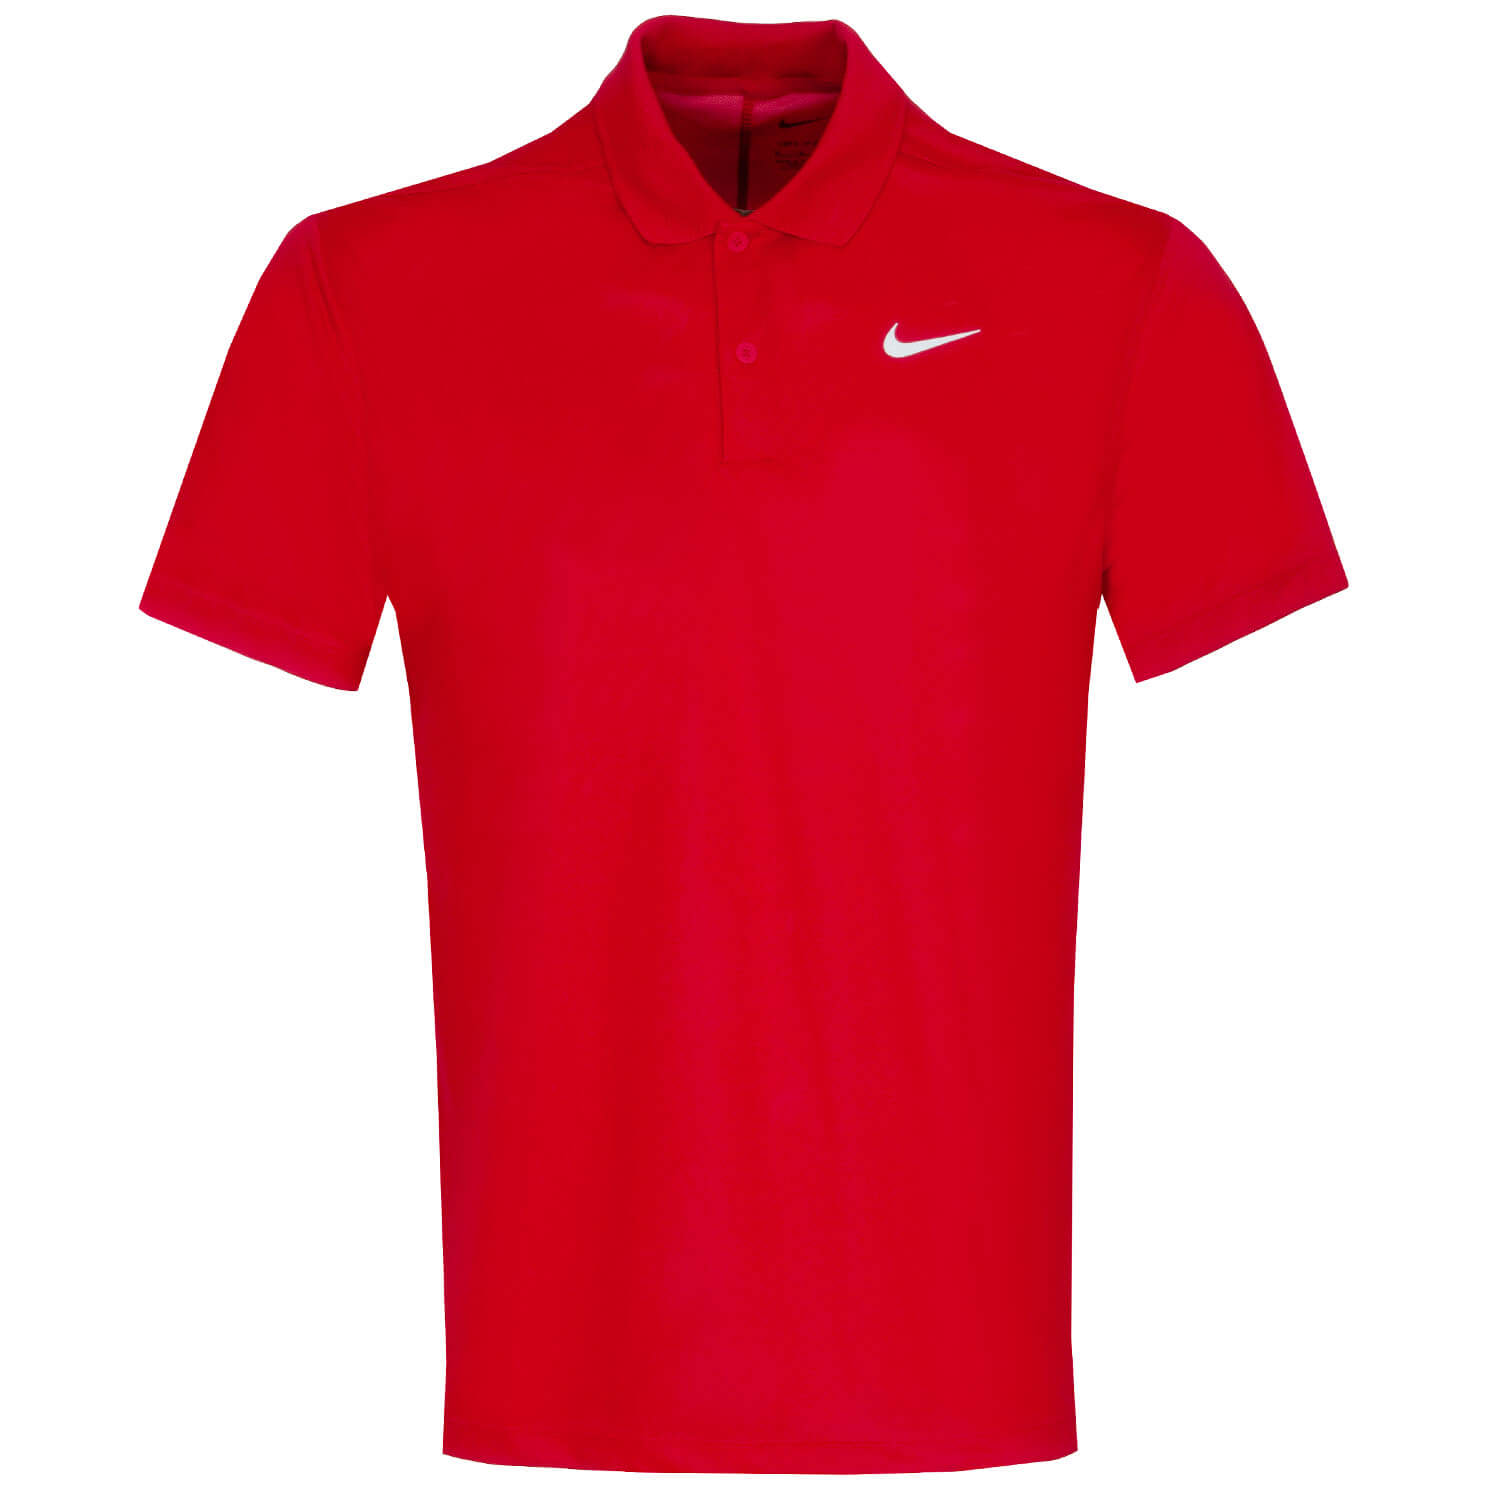 Nike Dri-FIT Victory Solid Golf Polo Shirt – University Red